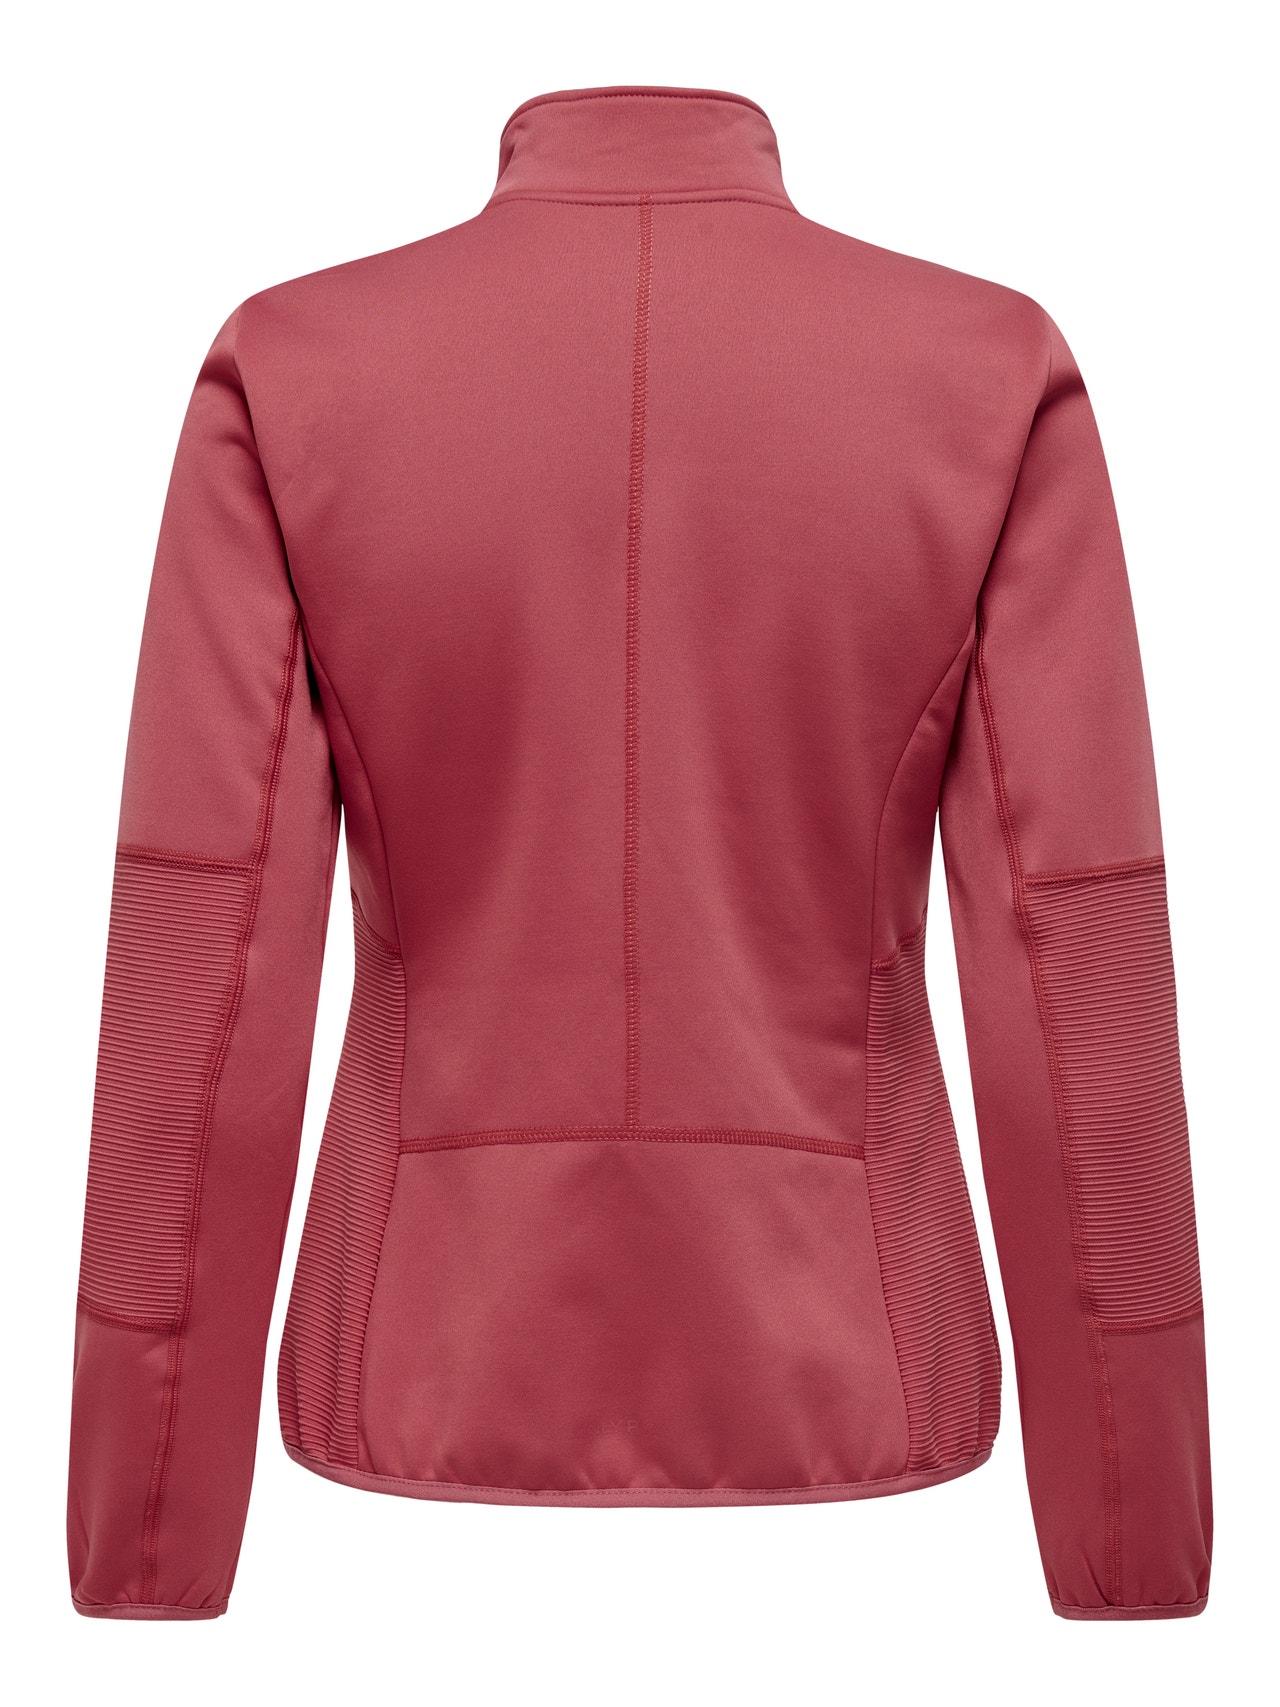 ONLY High neck Jacket -Mineral Red - 15233181